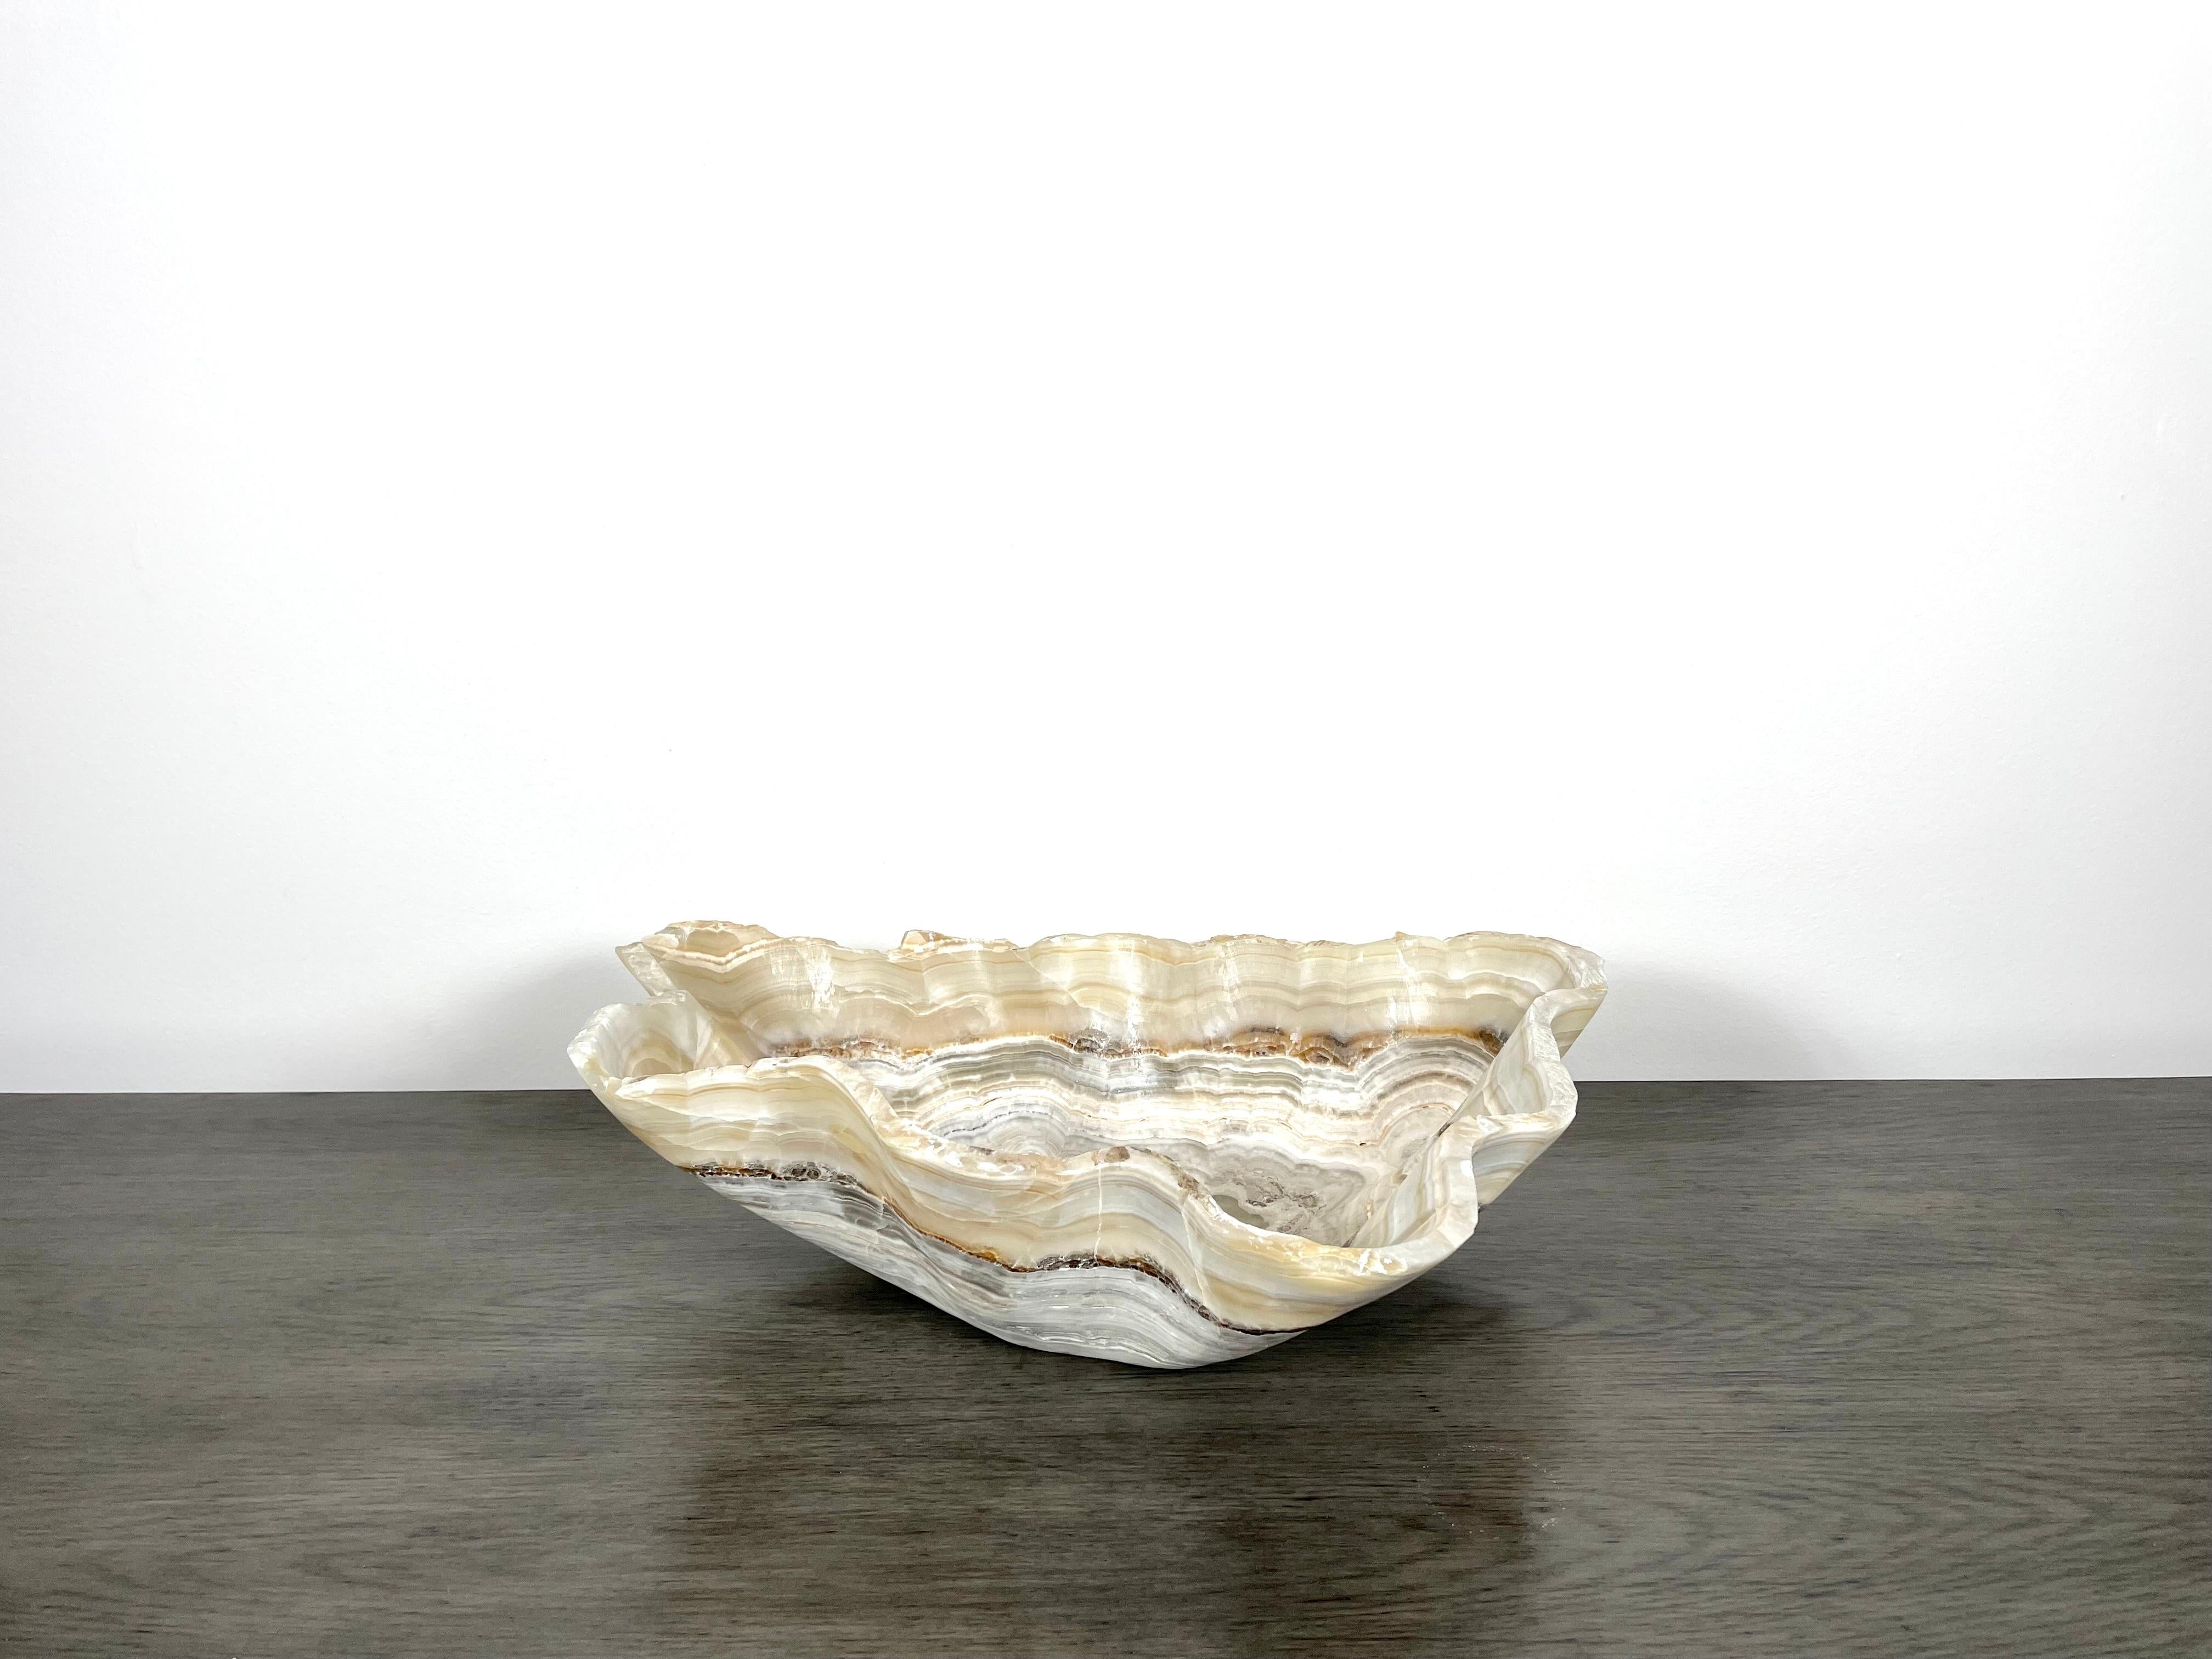 An exquisite medium onyx bowl with a raw edge. This bowl has tones of cream, beige and grey, with thin dark rust-colored veining. This one of a kind decorative bowl is meticulously hand-carved from a single piece of onyx by skilled artists to reveal